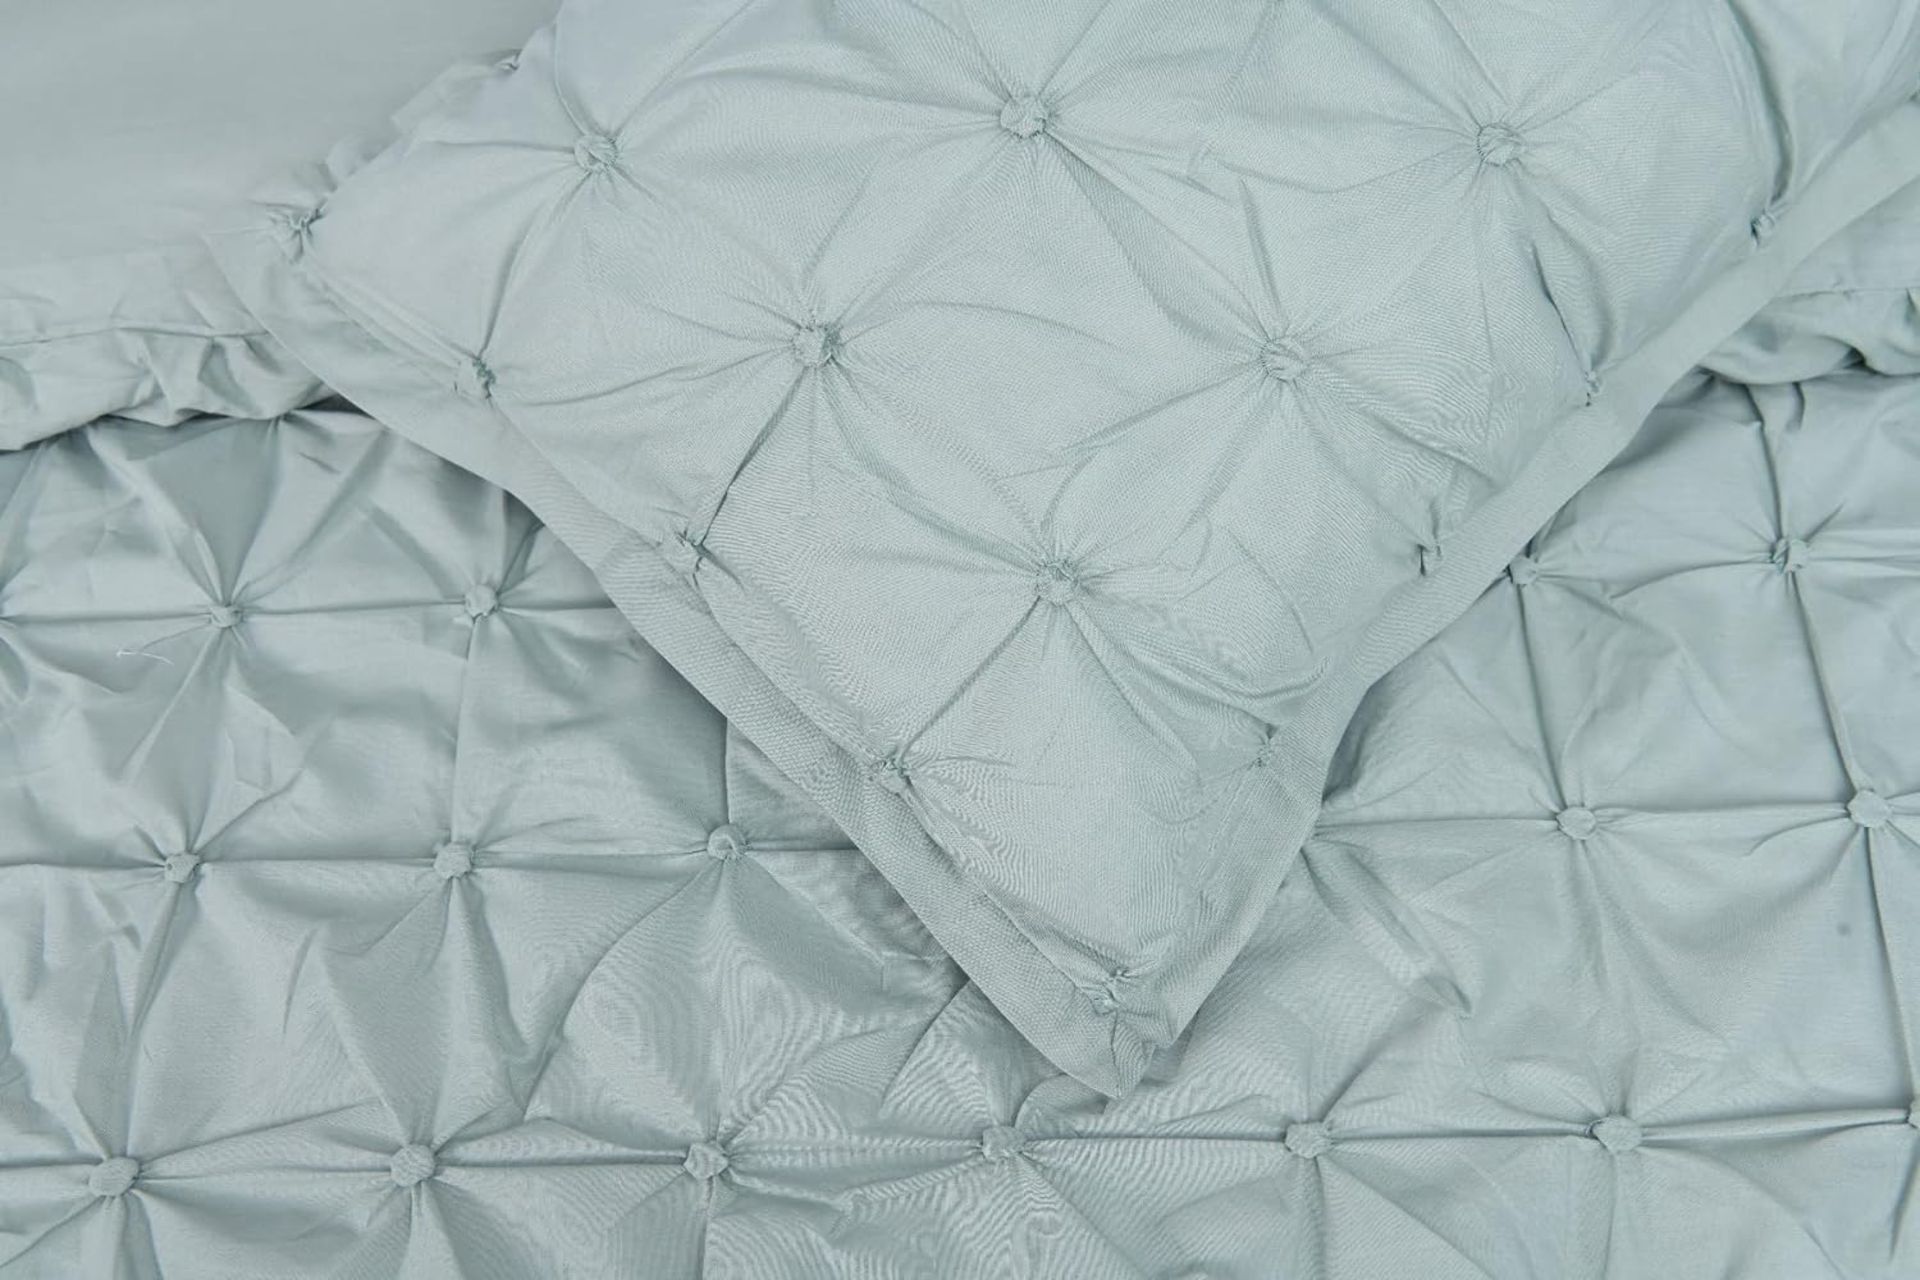 11x NEW & PACKAGED SLEEPDOWN Rouched Easy Care SINGLE Duvet Set - SAGE GREEN. RRP £22.99 EACH. (R7- - Image 3 of 3